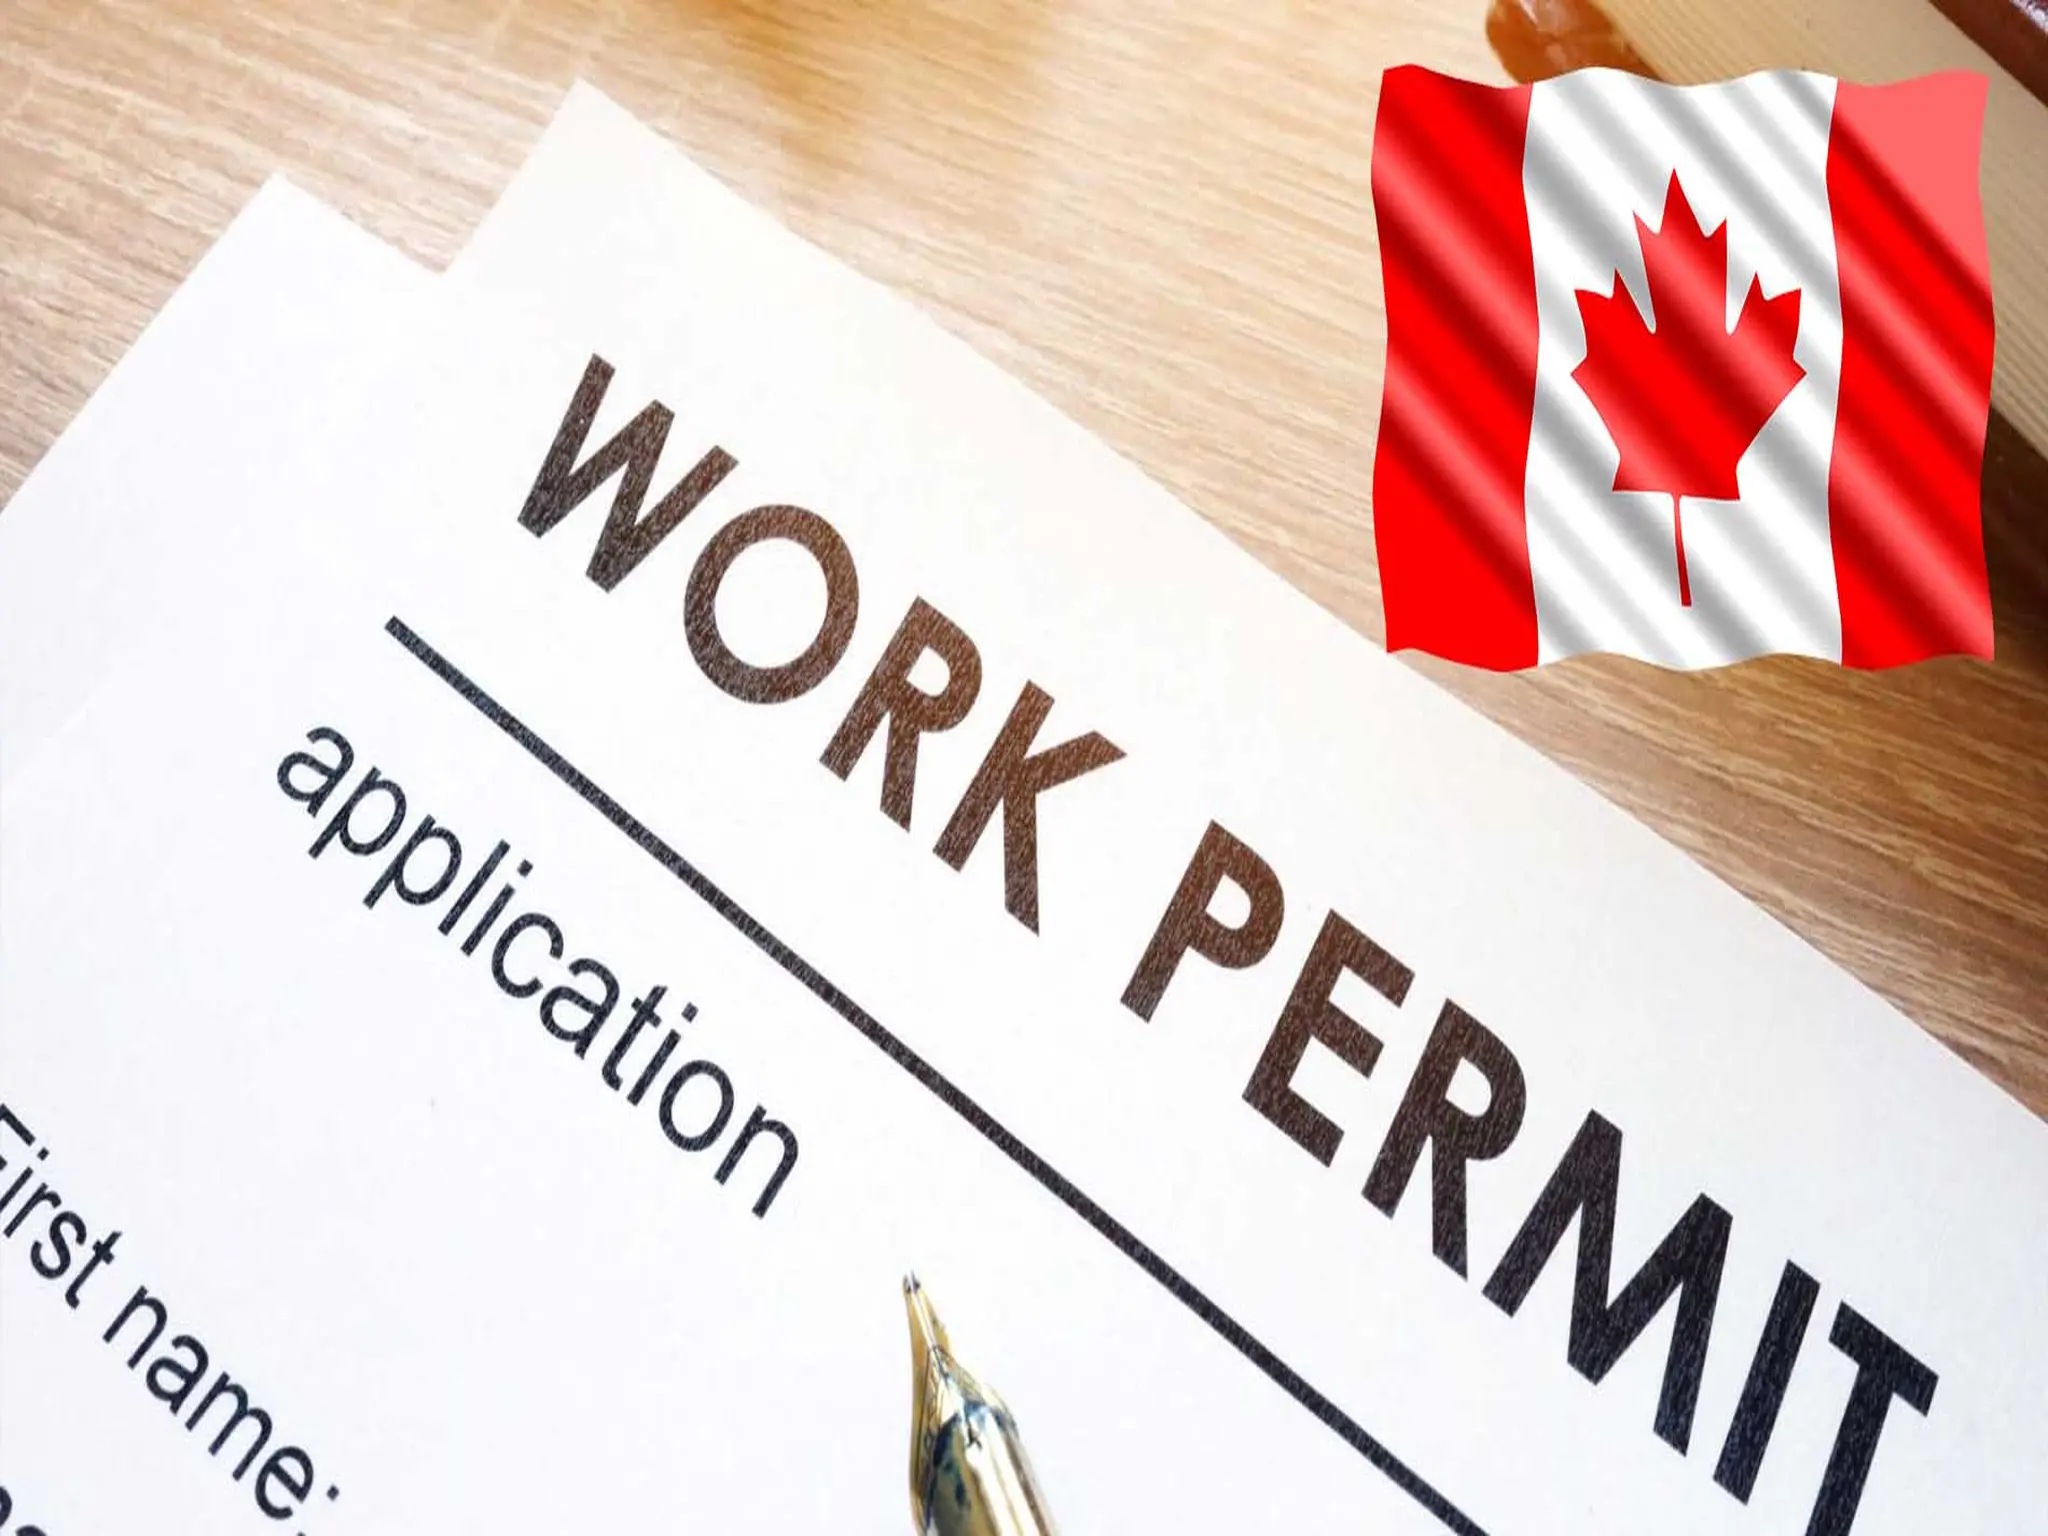 International students in Canada are requesting an extension of 18-month work permits